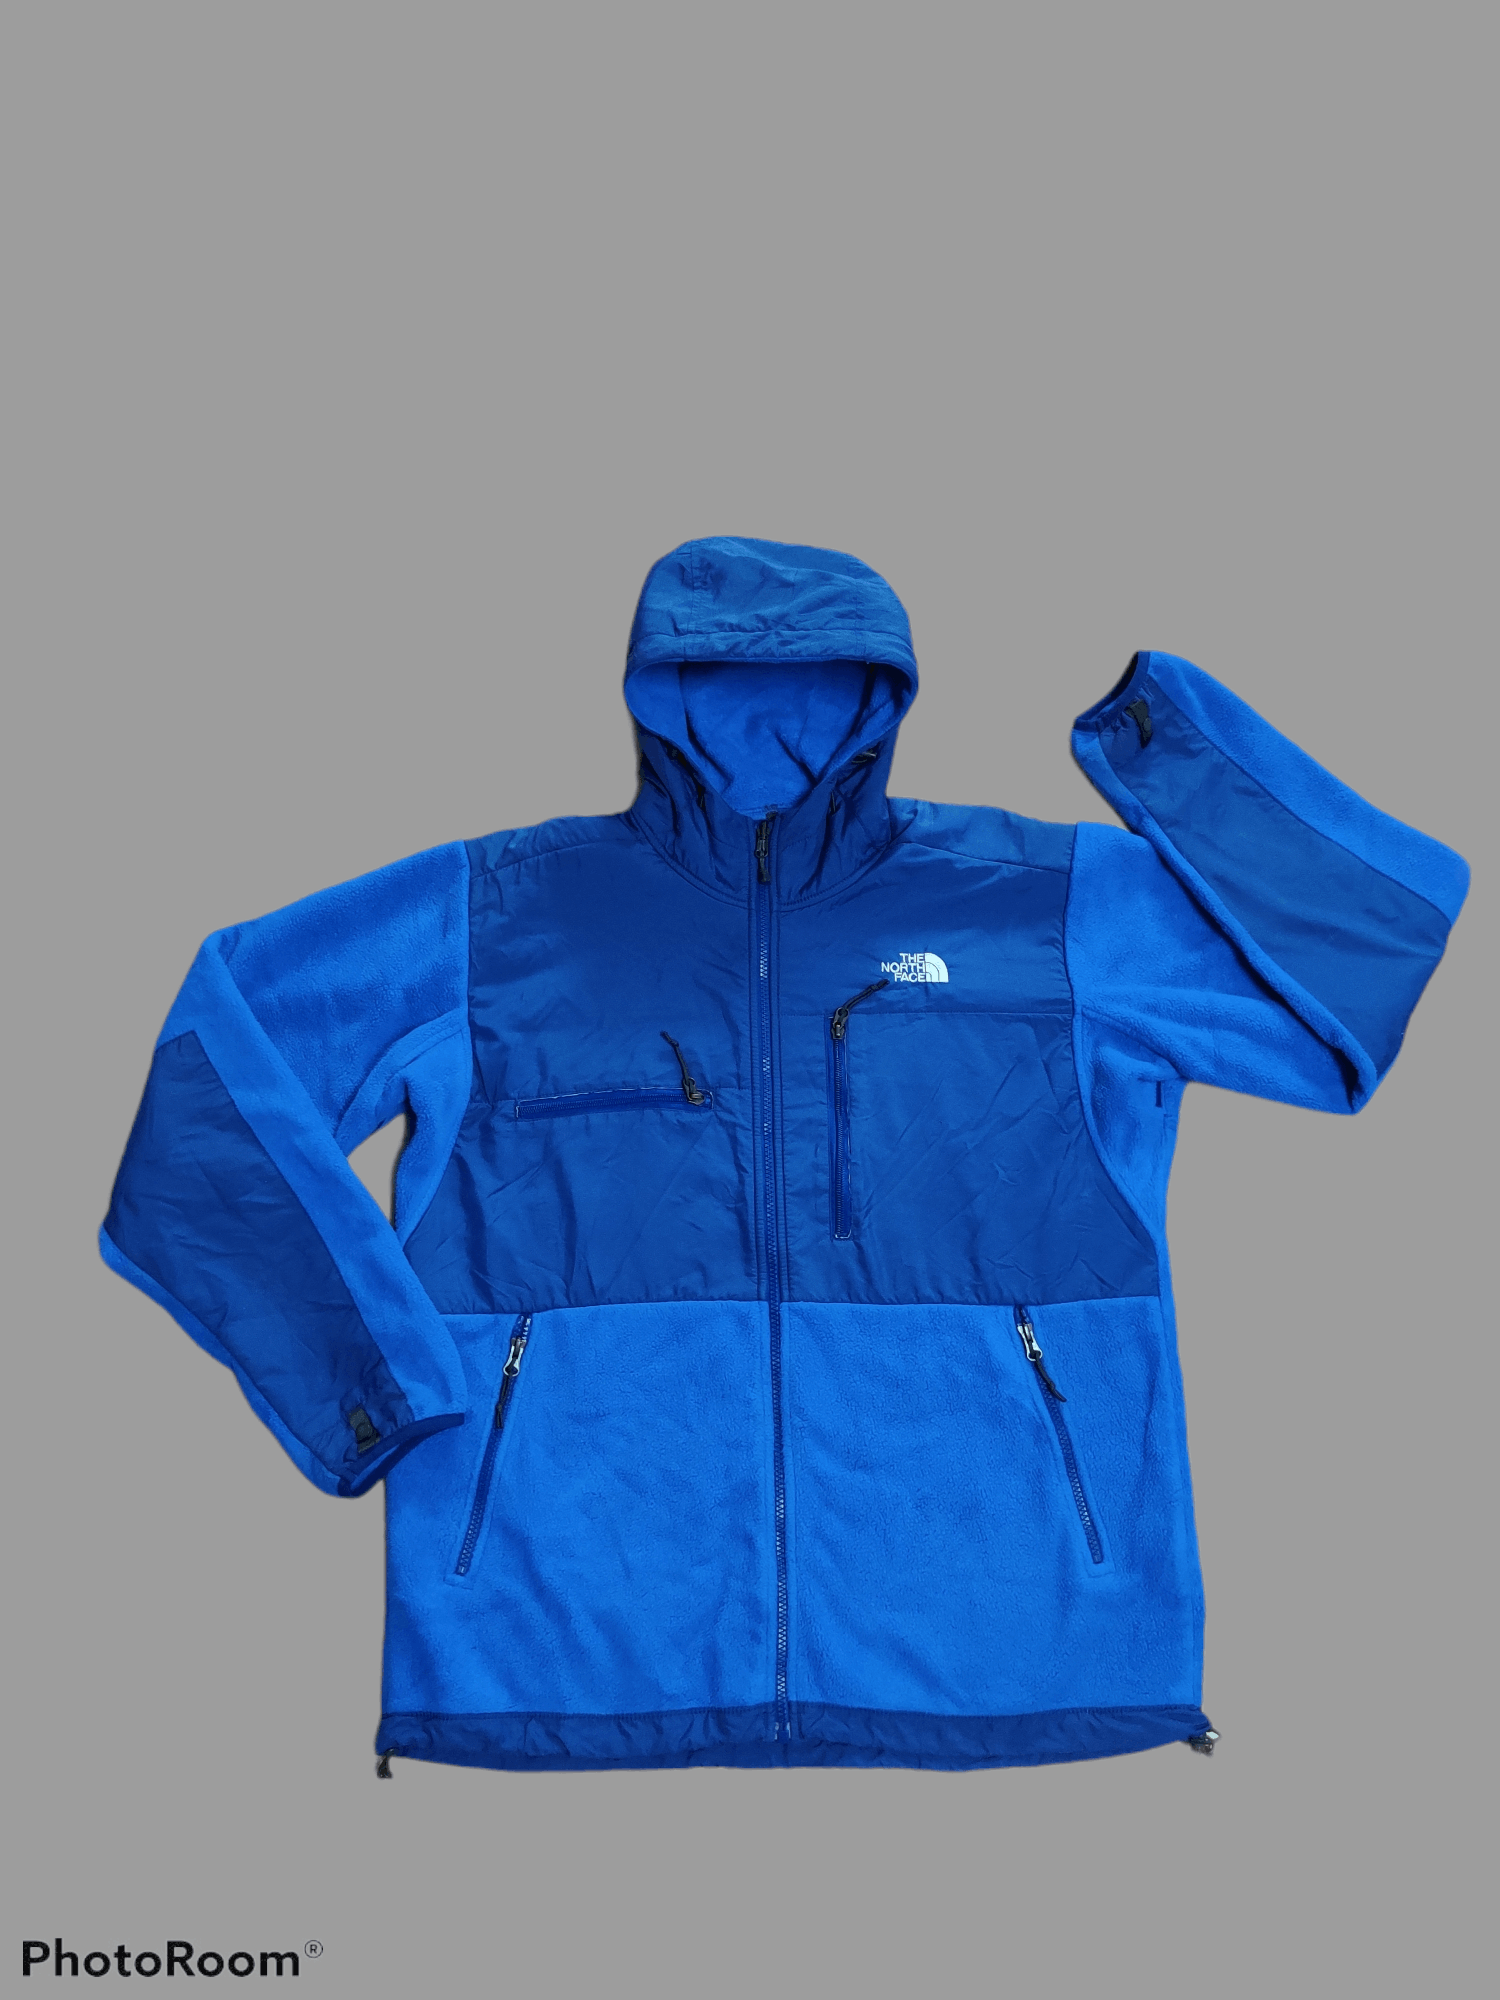 The North Face The north face denali fleece jacket Size US L / EU 52-54 / 3 - 1 Preview